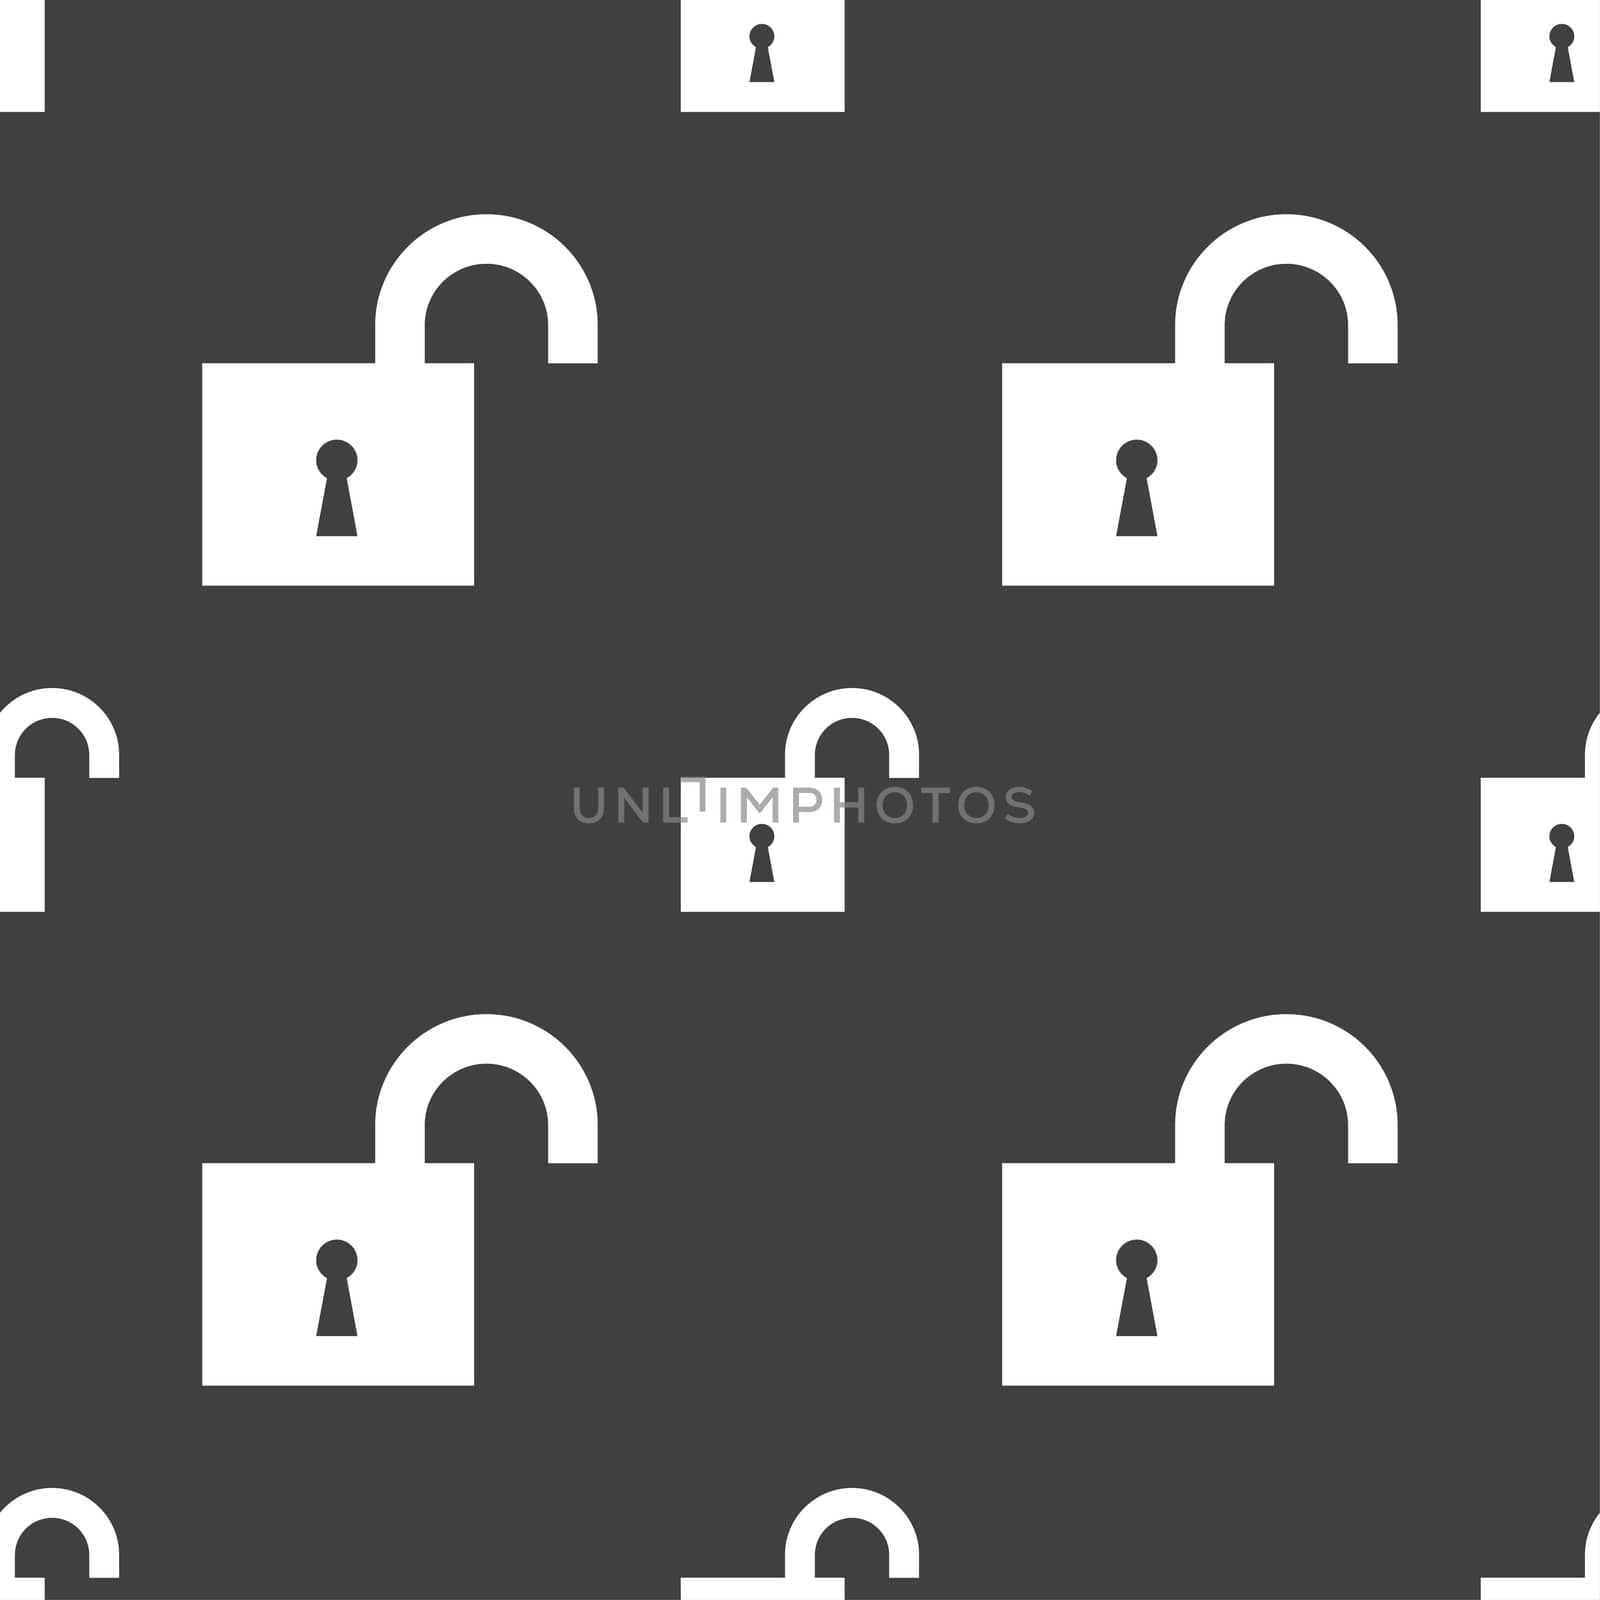 open lock icon sign. Seamless pattern on a gray background. illustration